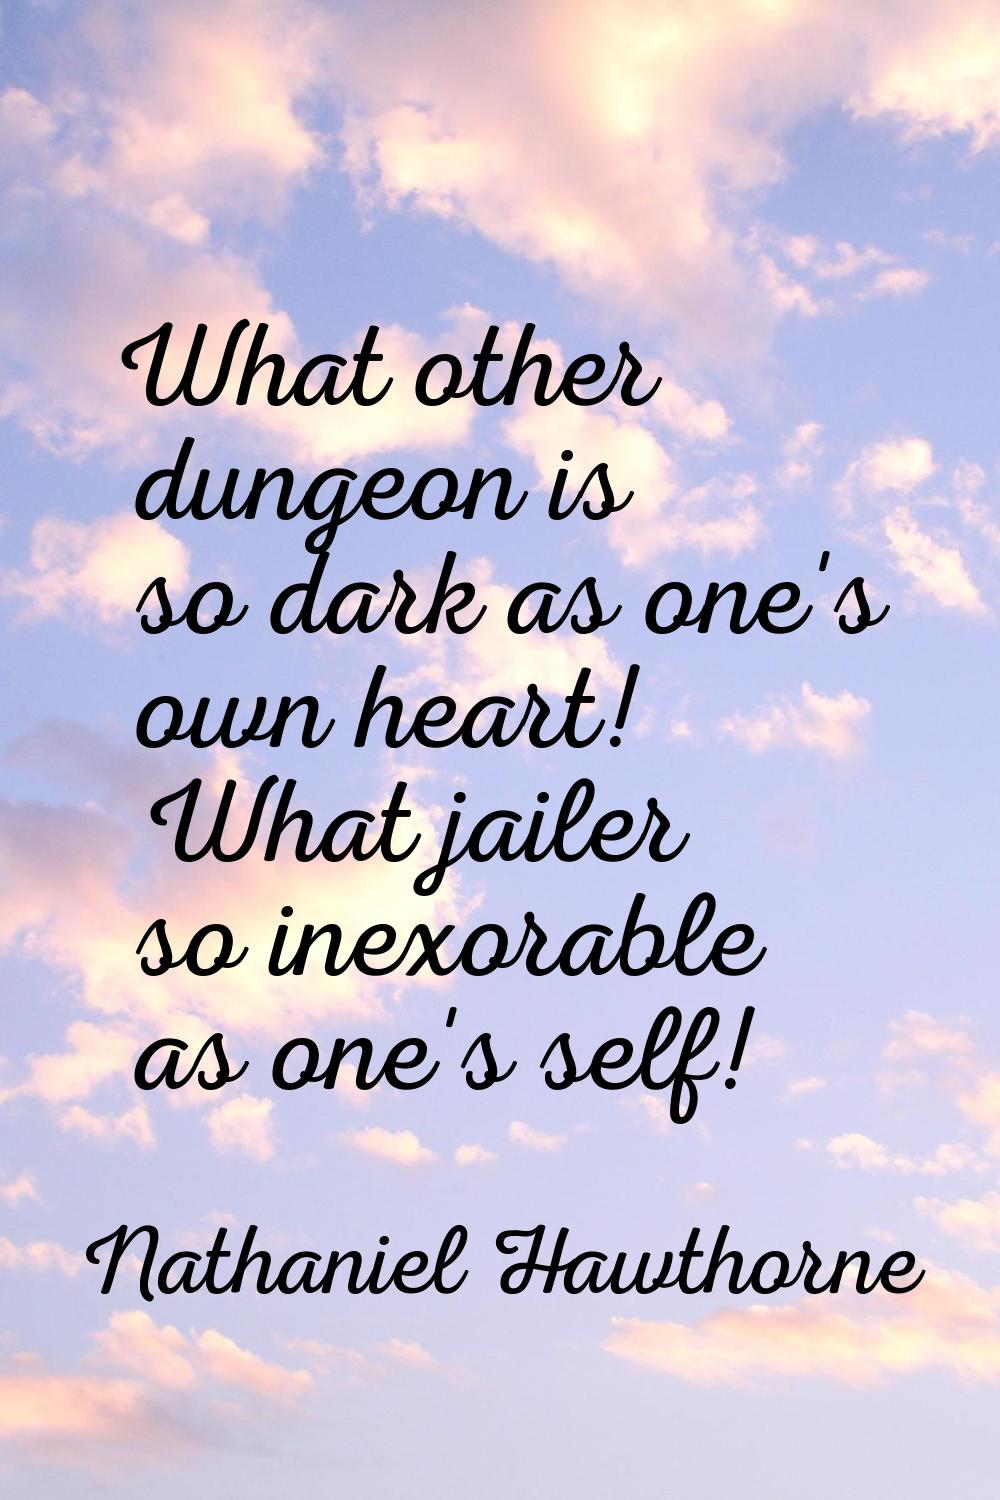 What other dungeon is so dark as one's own heart! What jailer so inexorable as one's self!